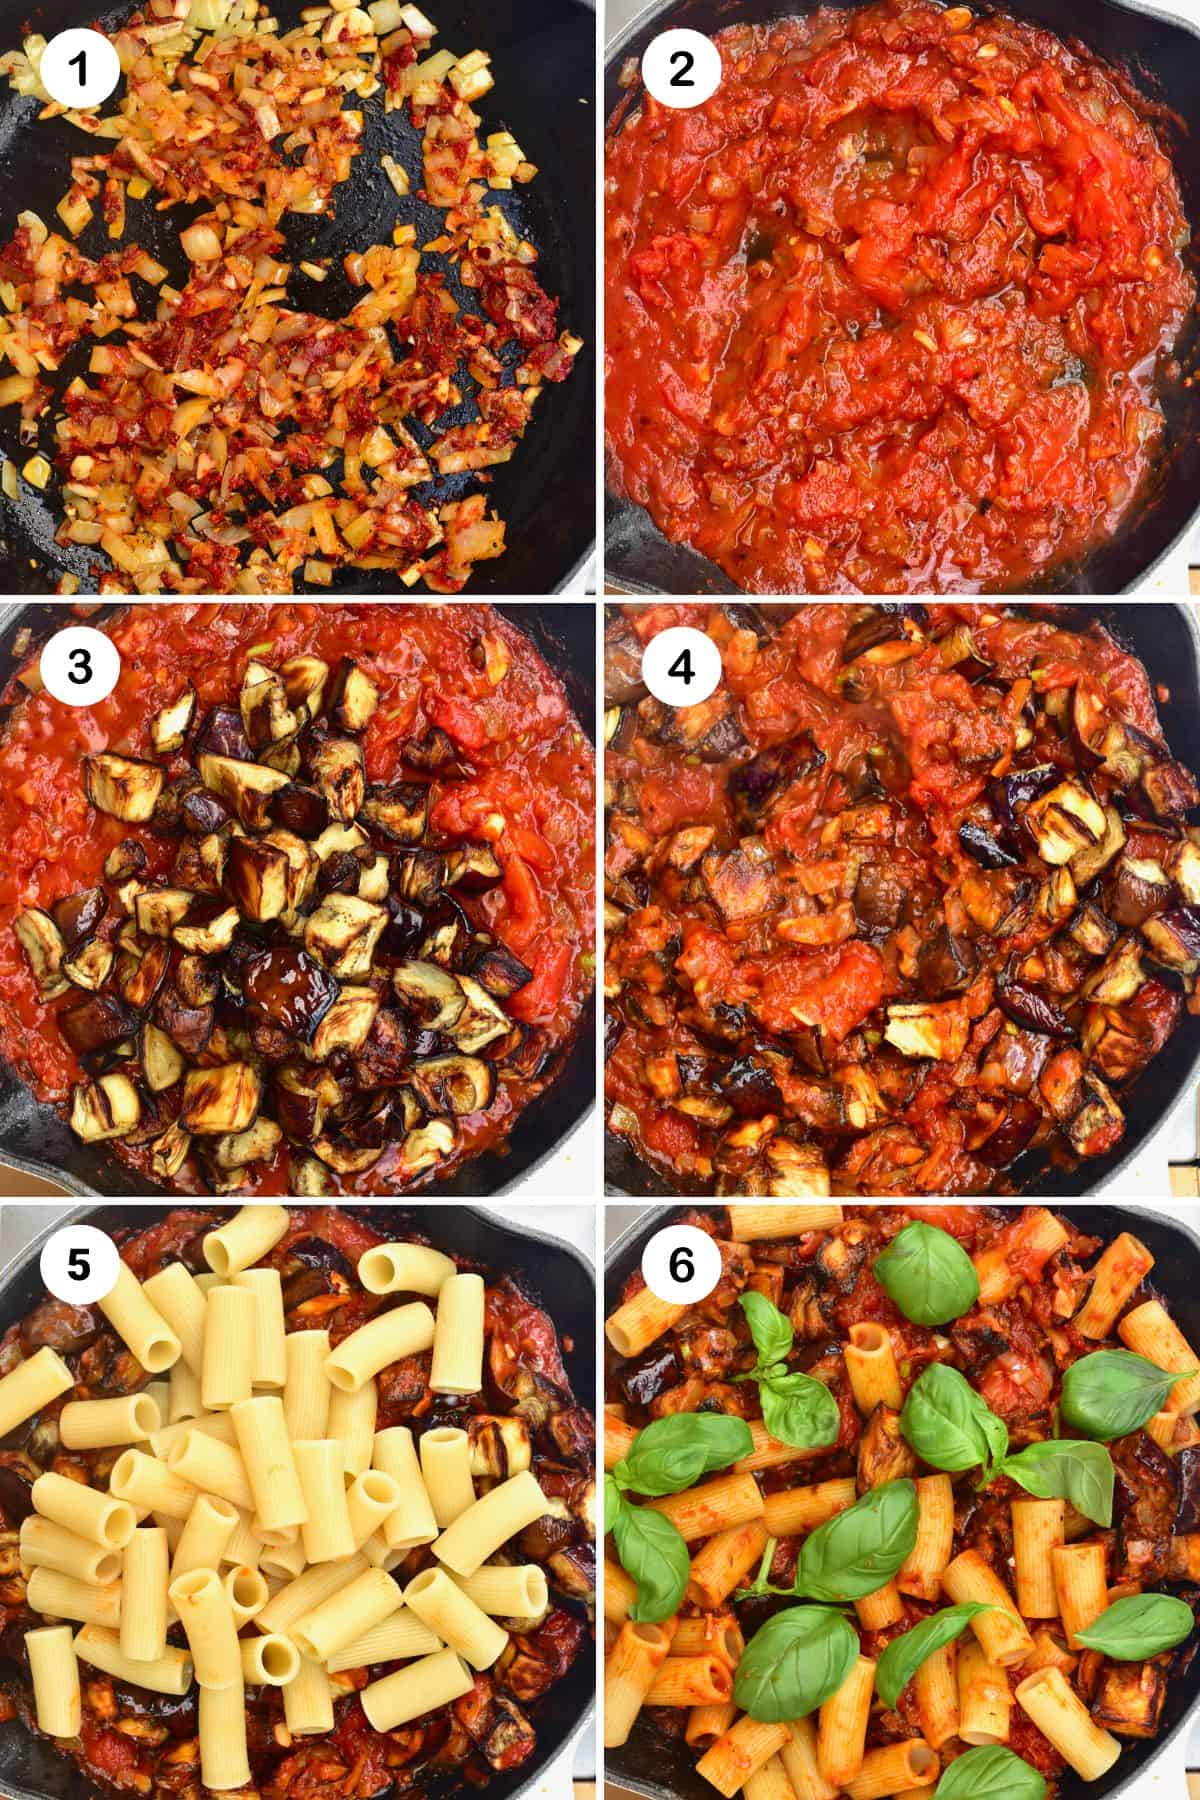 Steps for preparing pasta sauce and adding pasta and eggplant